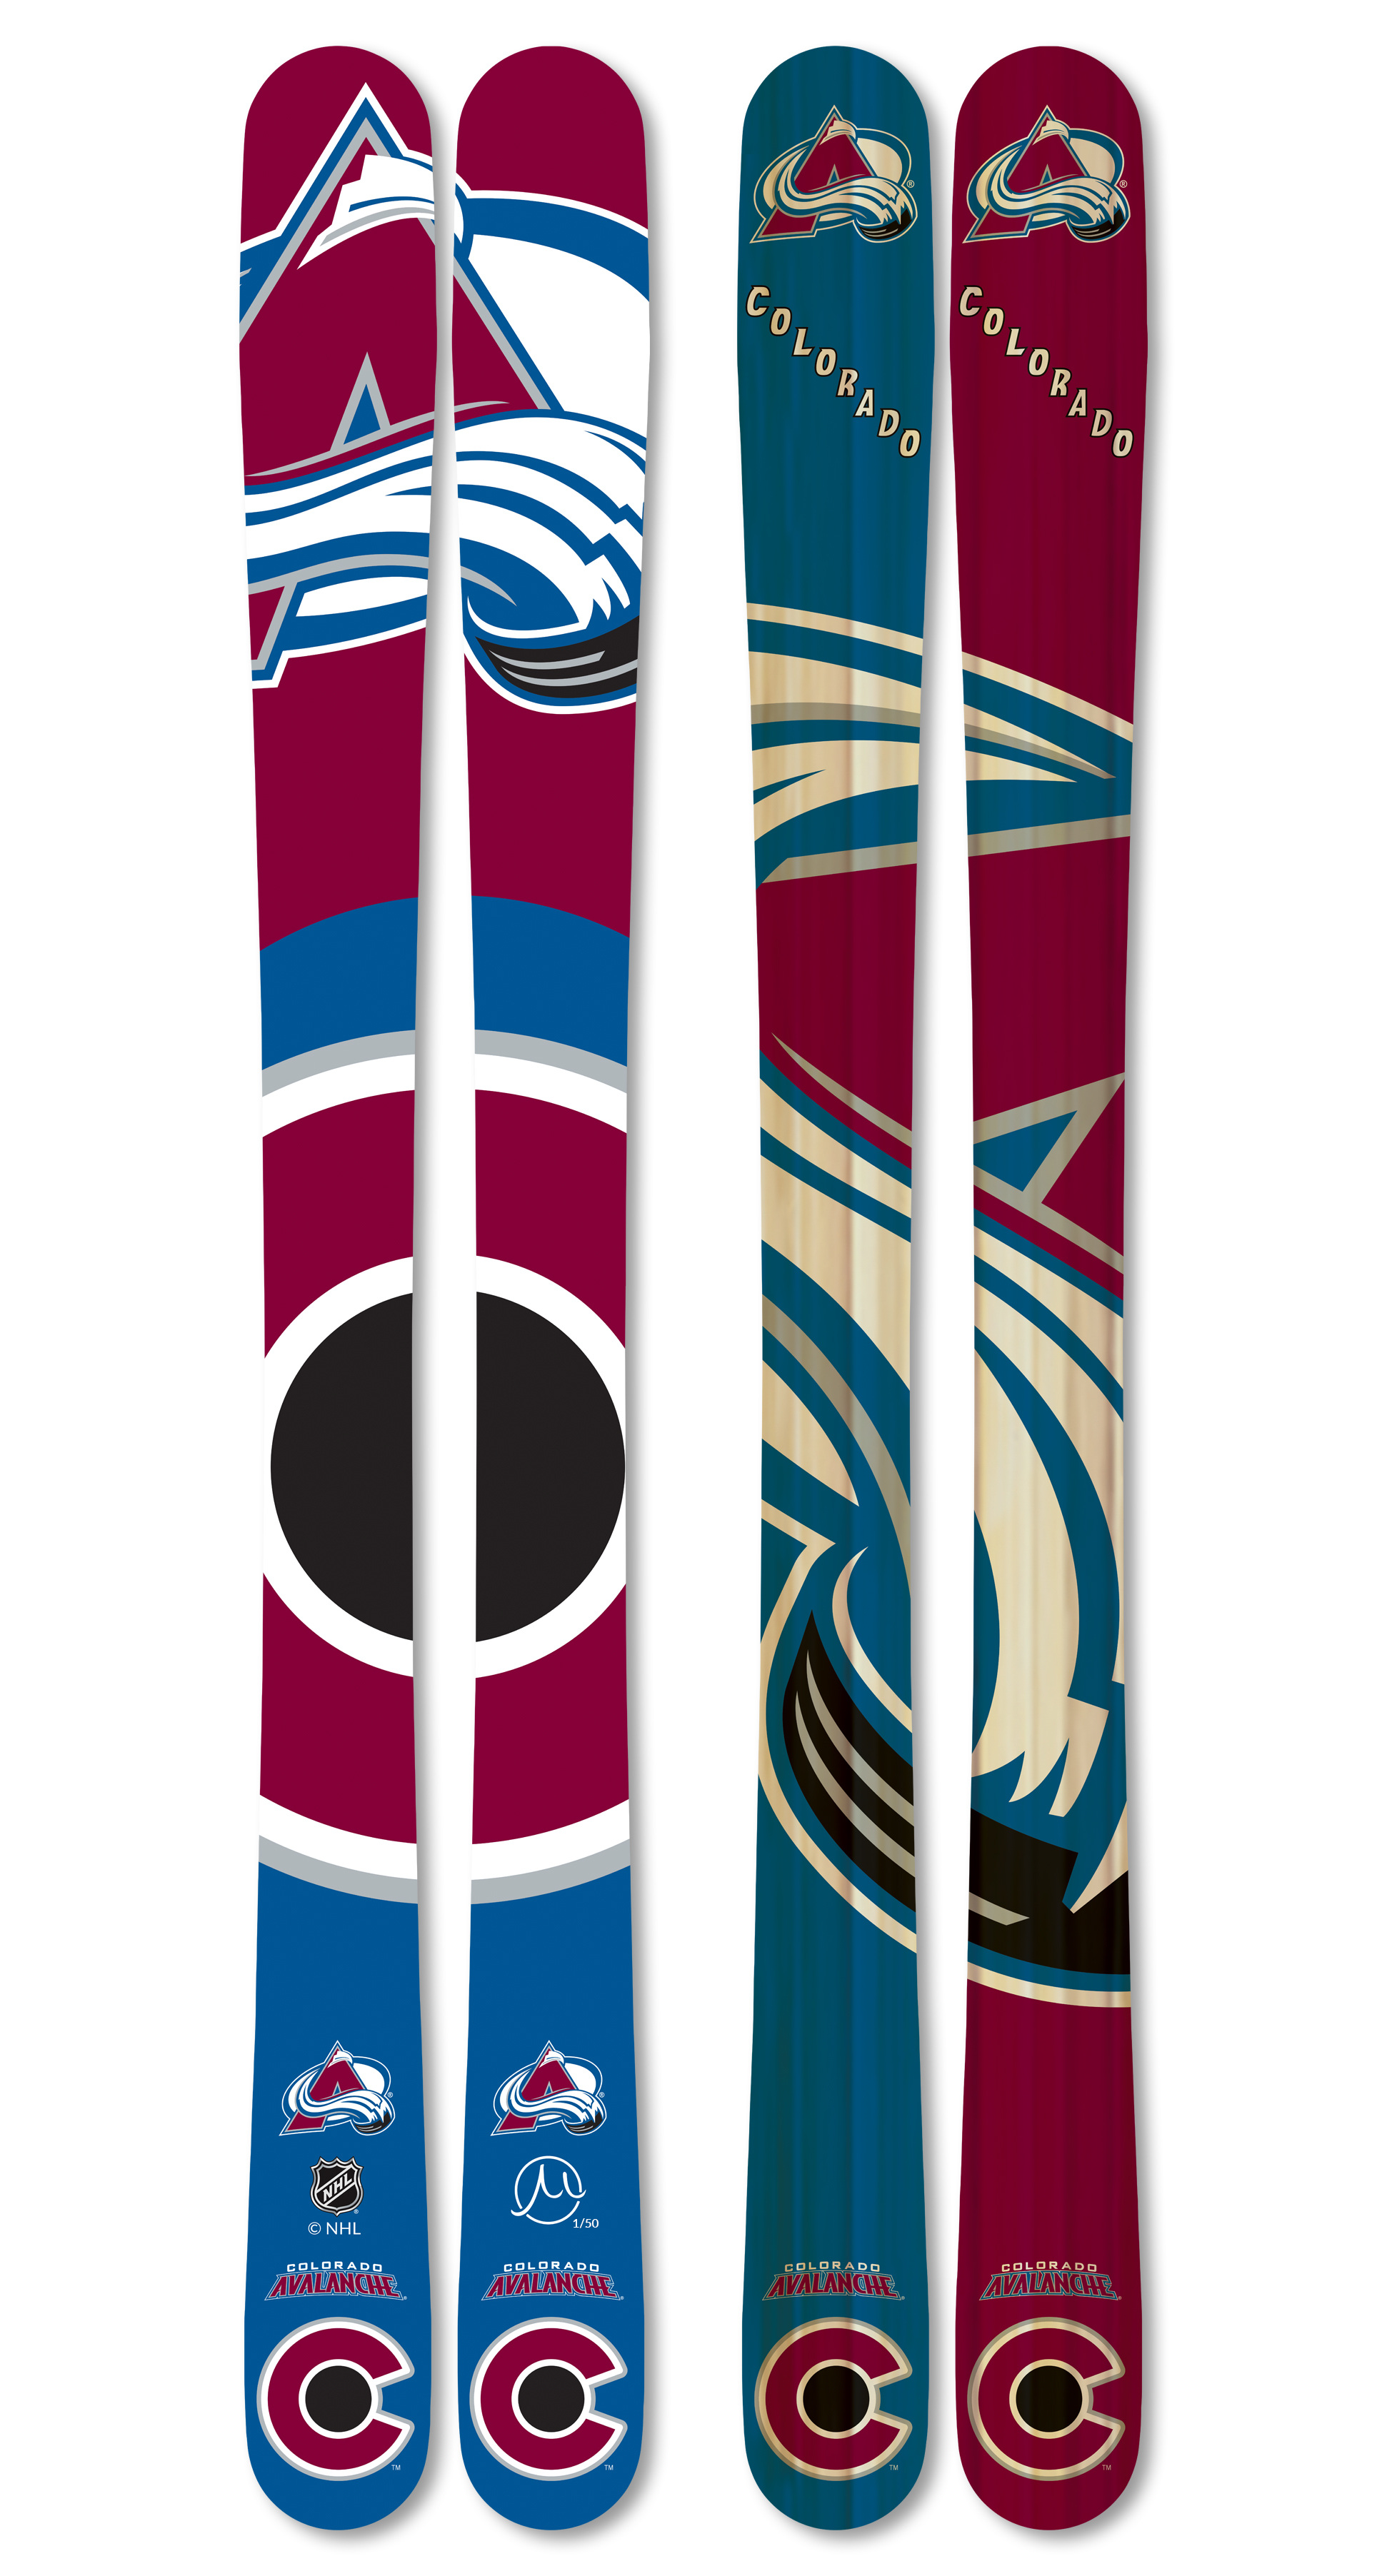 Nhl colorado avalanche collectors skis large